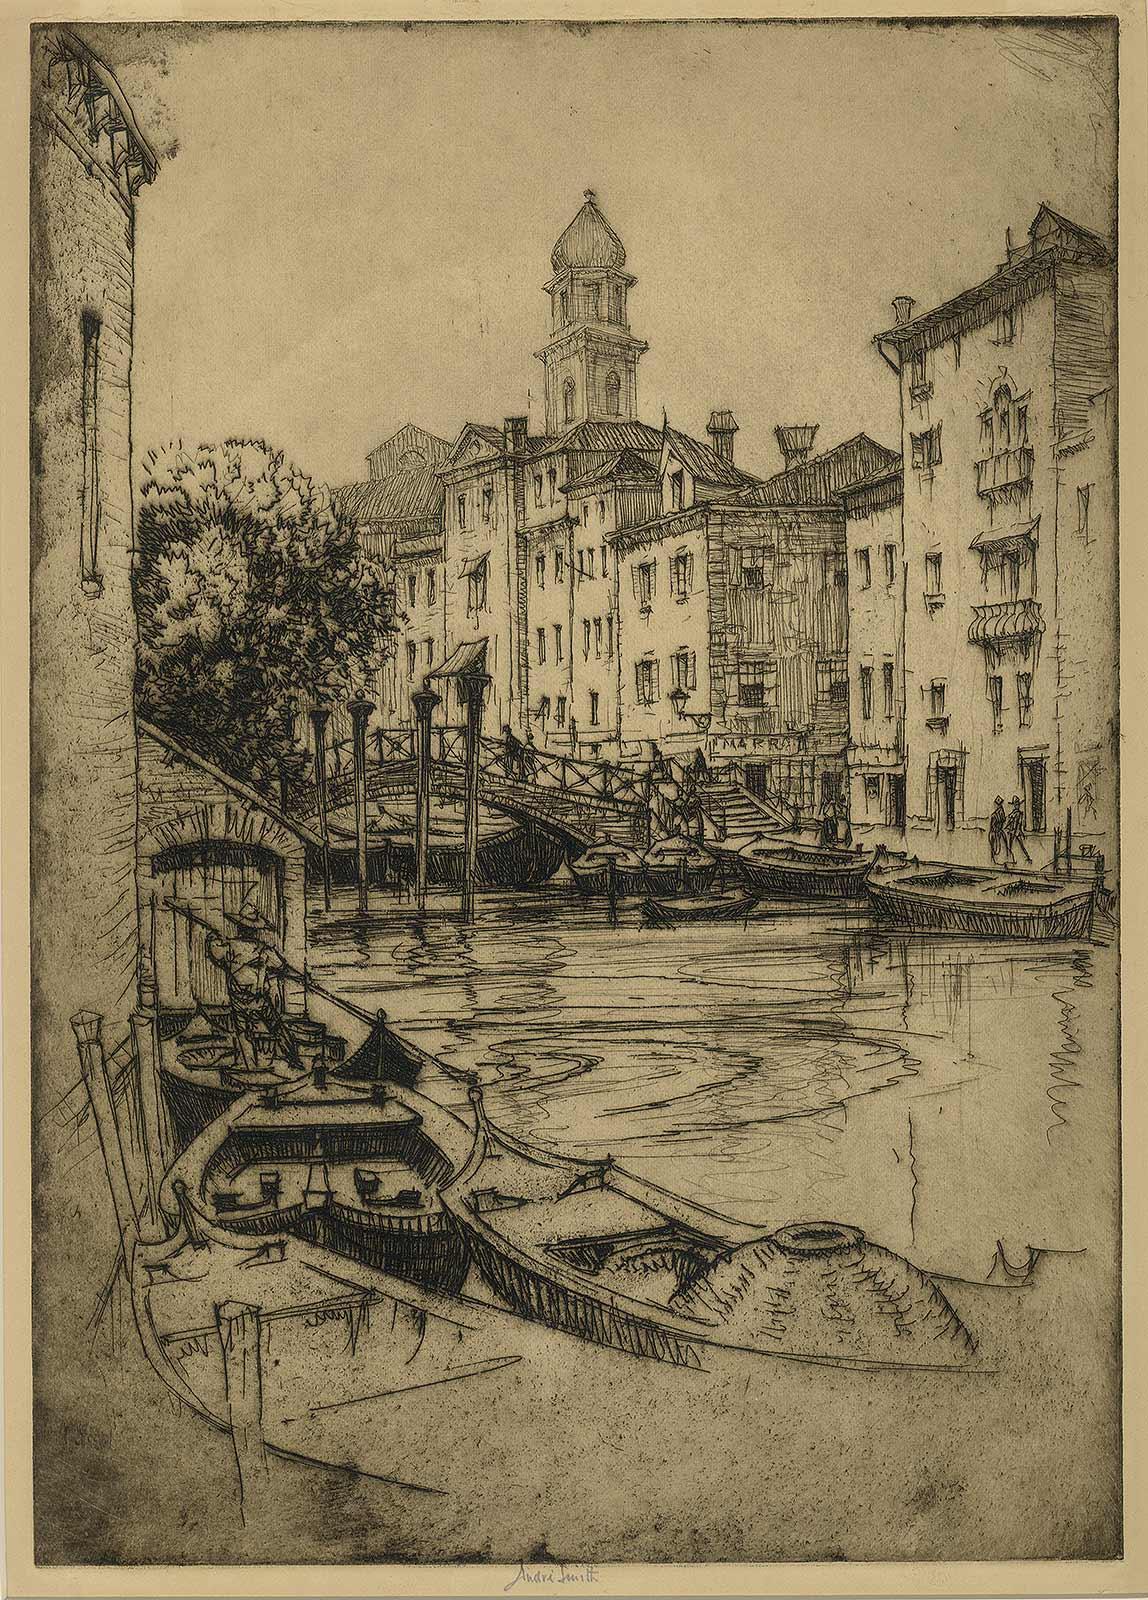 Venice (gondolas, arched bridges and villas along a canal of this fabled city) - Brown Landscape Print by André Smith